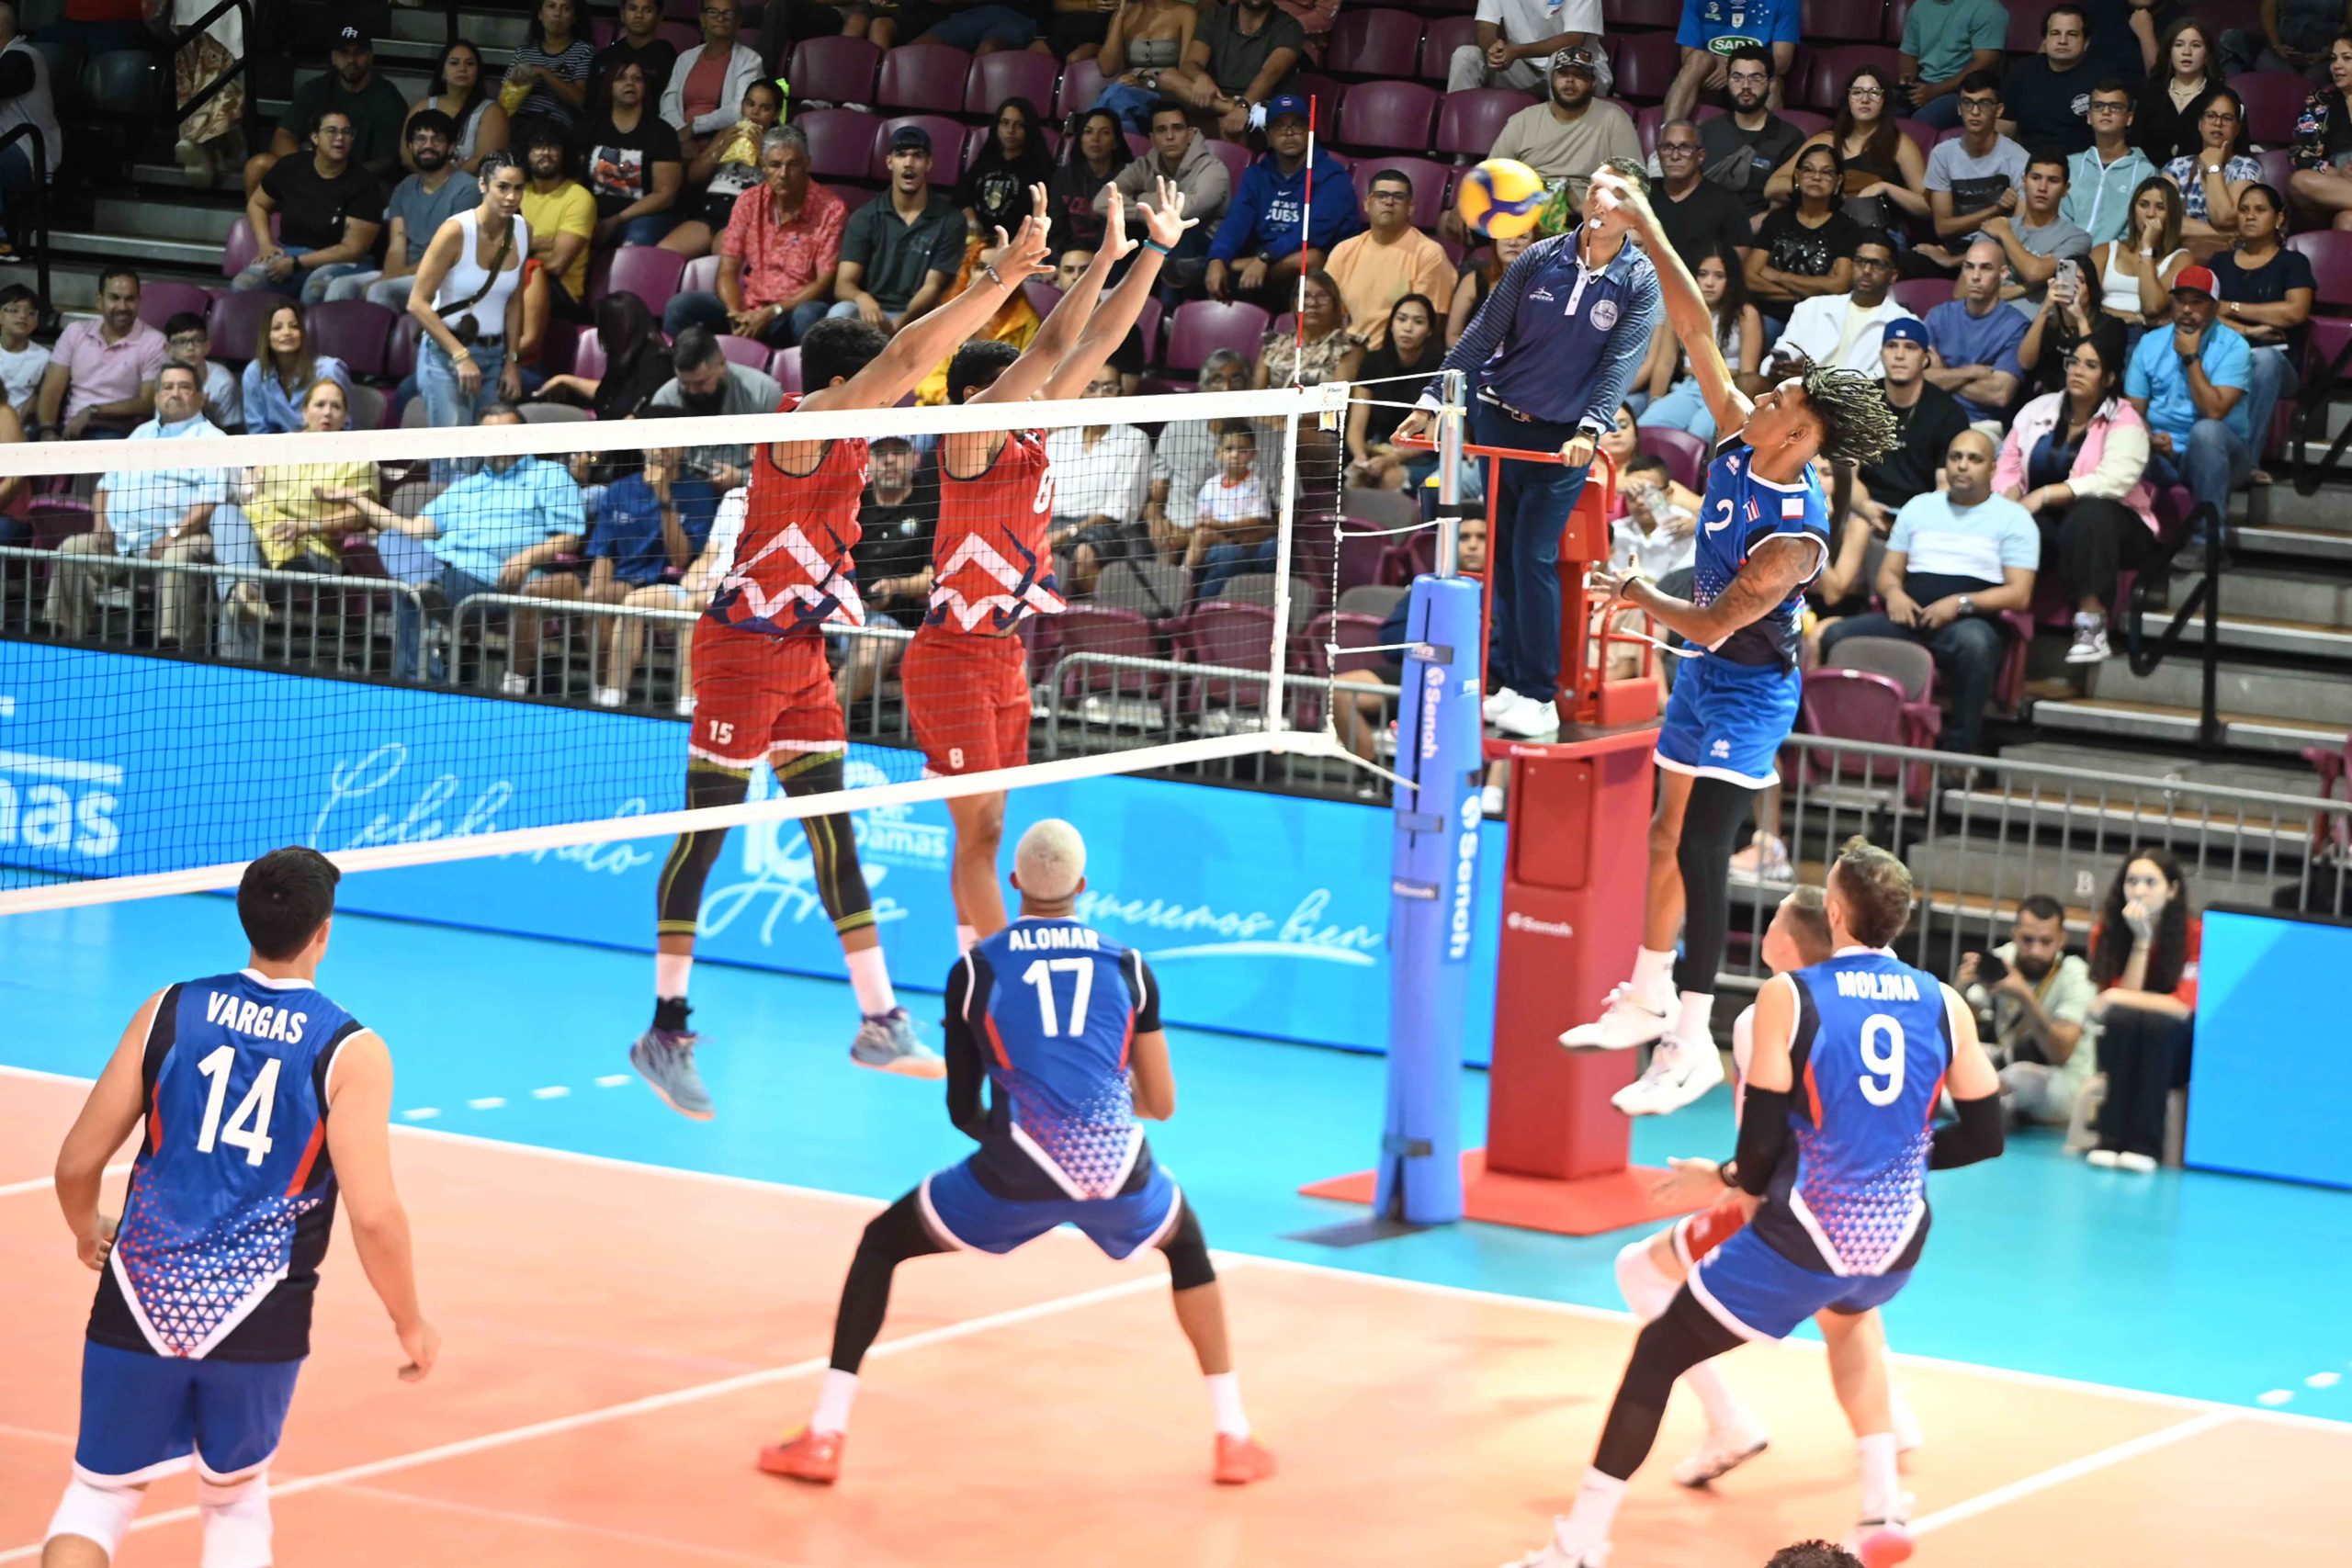 Puerto Rico beat Dominican Republic and is still undefeated in NORCECA Men’s Final Four